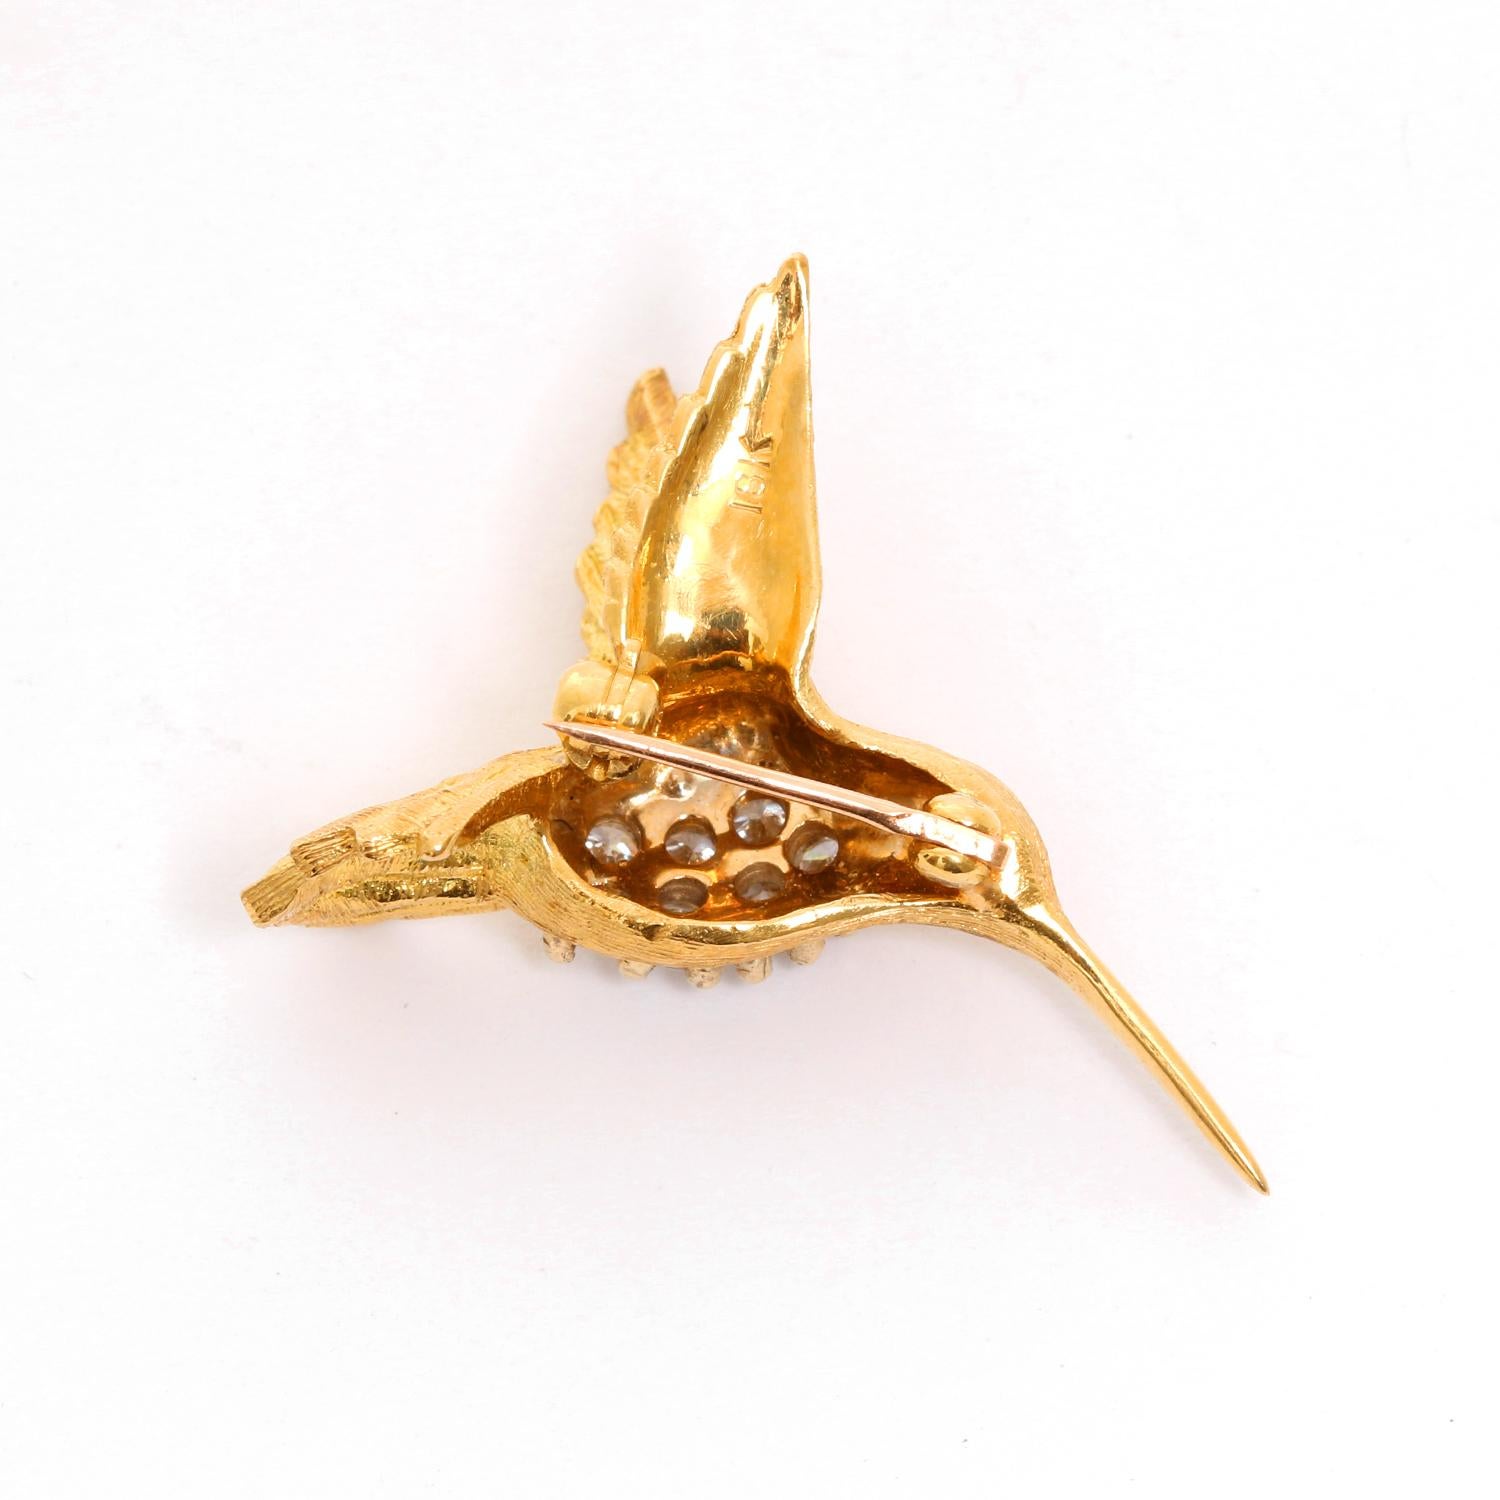 Beautiful Hummingbird Diamond and Ruby Brooch - 18K Yellow gold humming bird pendant with 7 Round Brilliant Diamonds, color G H. Diamond clarity VS. Total weight 7.2 grams. 